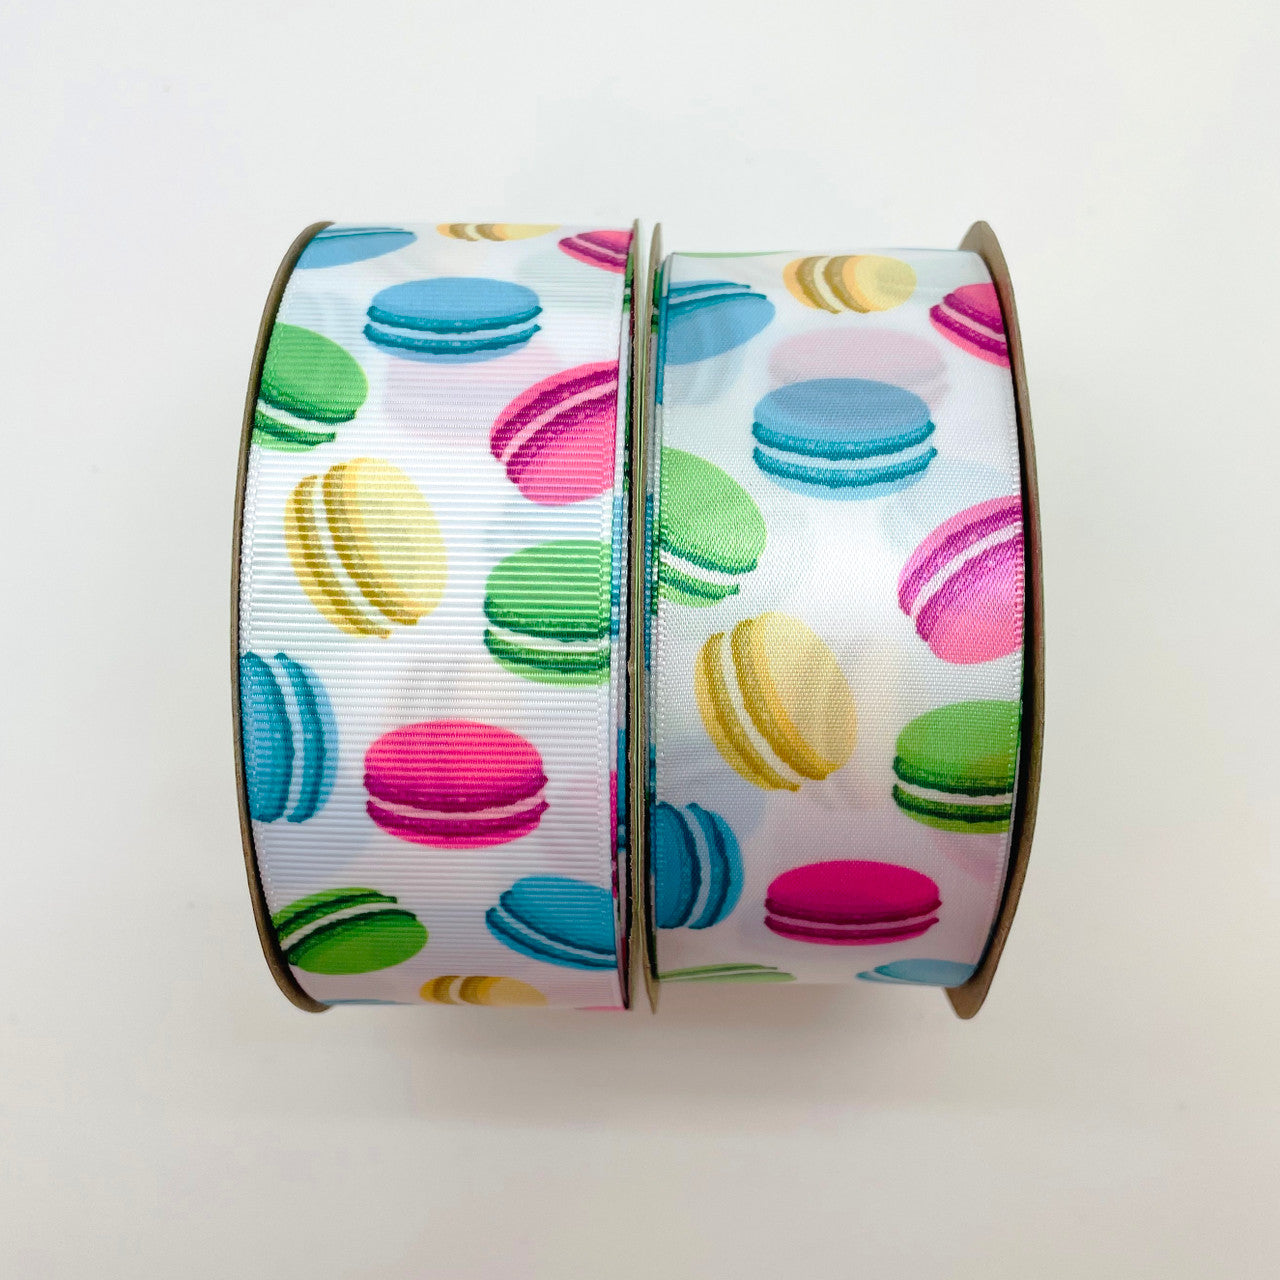 Our fun macaroon ribbon is printed on 1.5" grosgrain and satin for all your crafting needs!